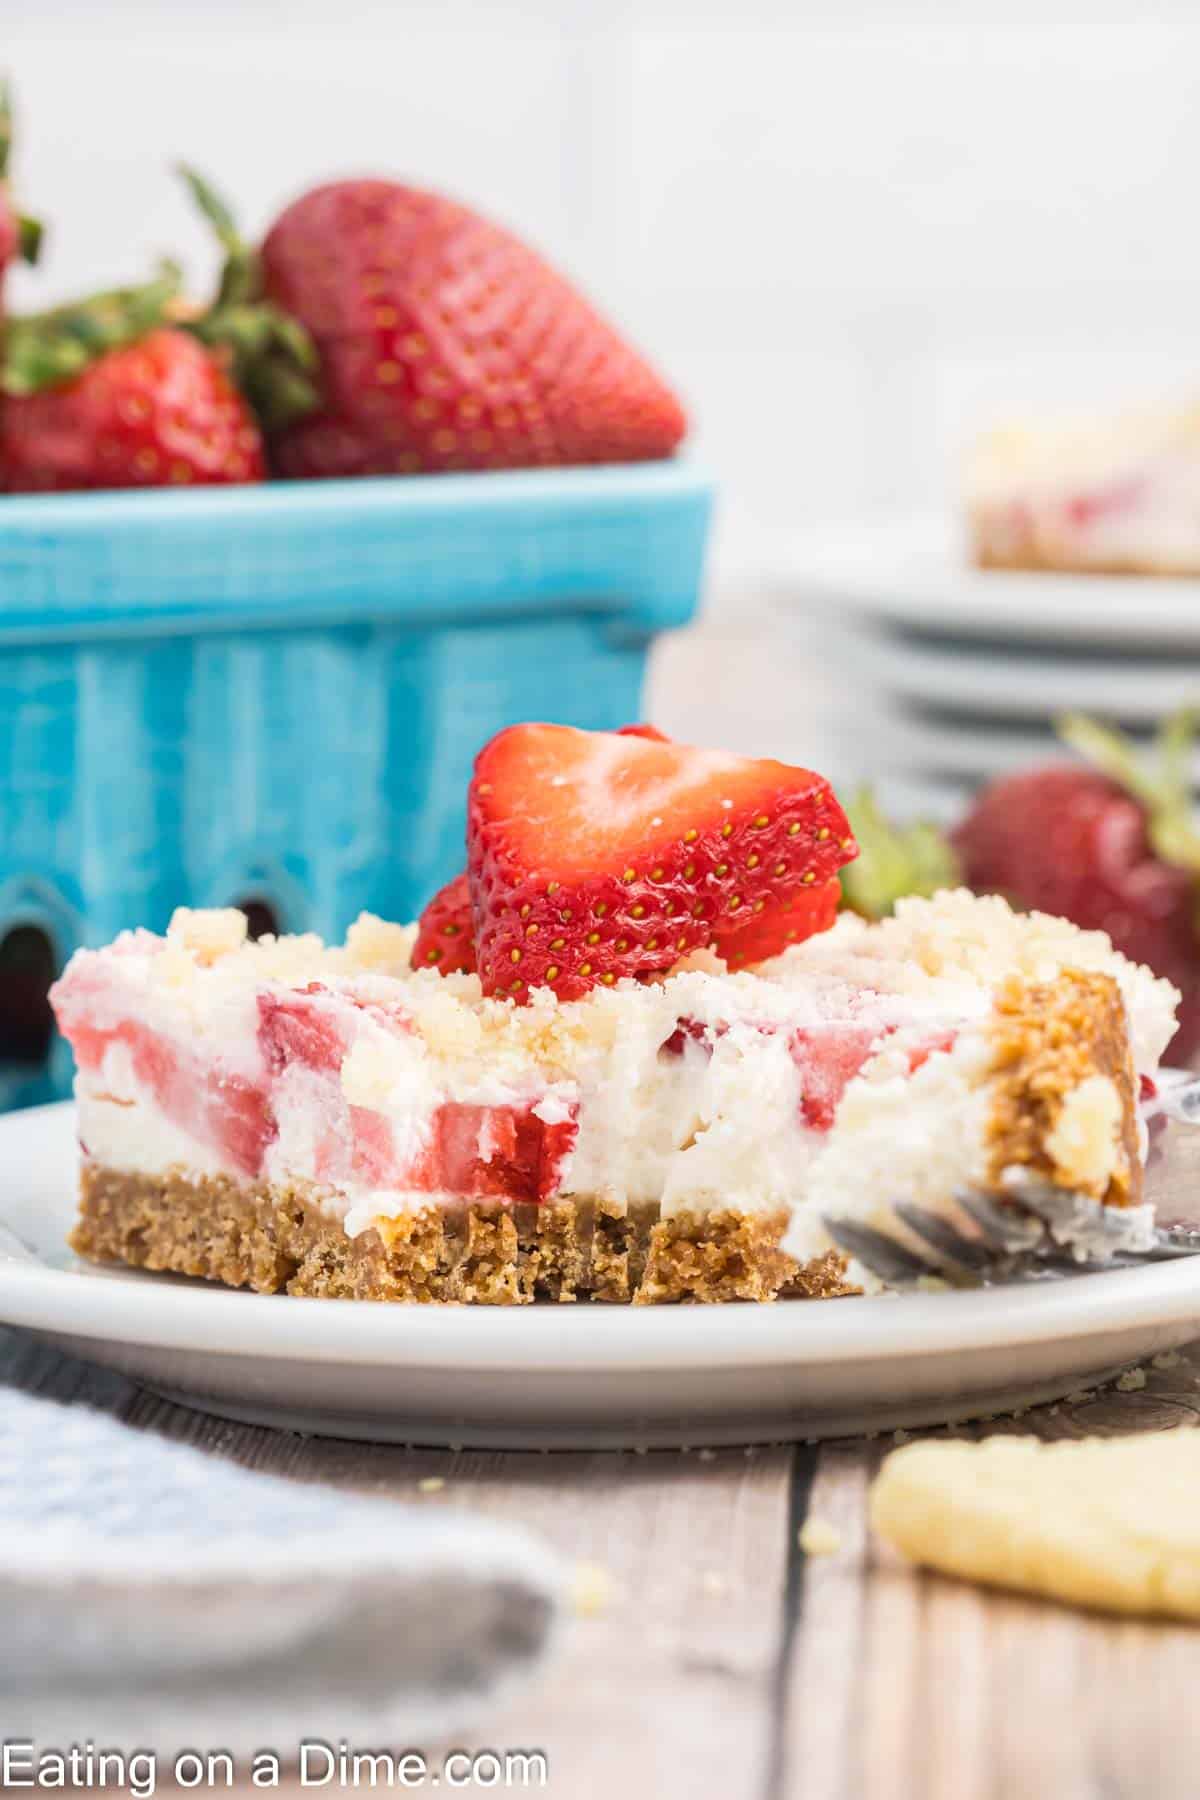 A slice of creamy strawberry cheesecake with a graham cracker crust sits on a white plate. A fork with a bite of the cheesecake rests beside it. Fresh strawberries garnish the slice, evoking memories of a delightful strawberry crunch bars recipe, with a basket of strawberries in the background on a wooden table.